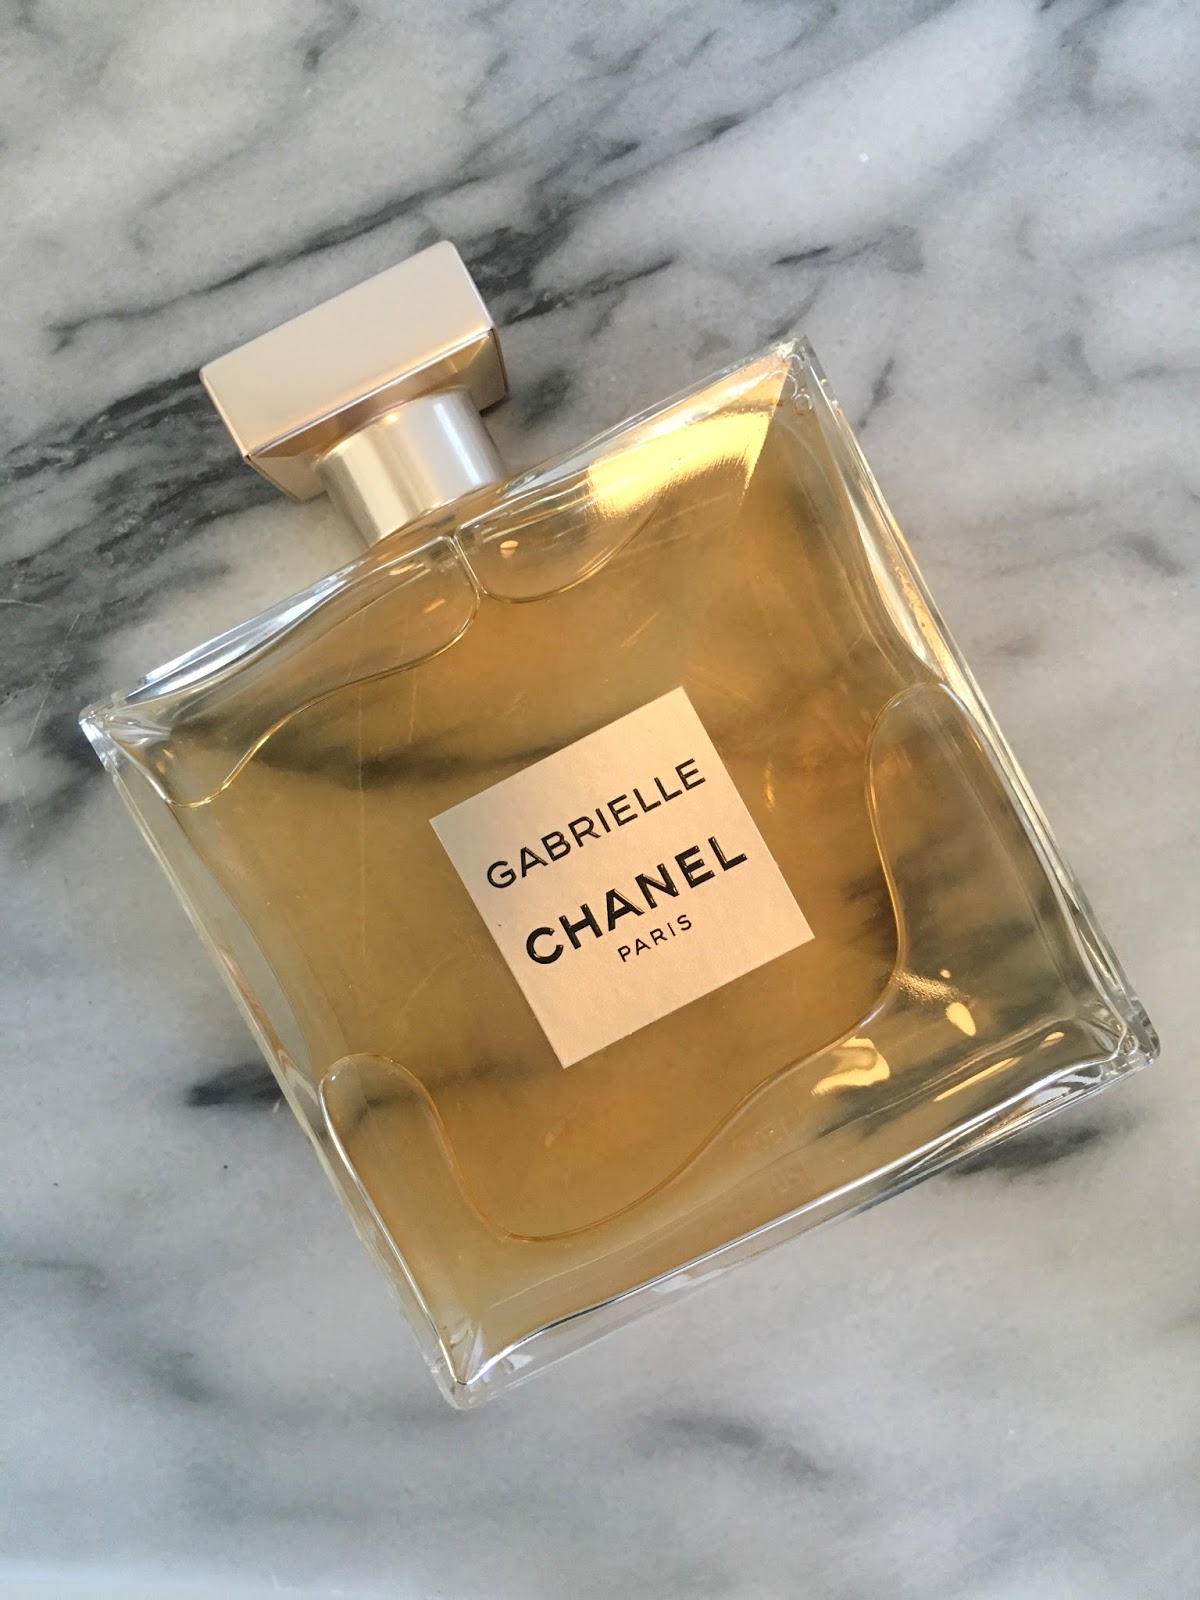 Chanel Gabrielle Eau de Parfum Unboxing! First Perfume Bottle Impressions  and Fragrance Thoughts 